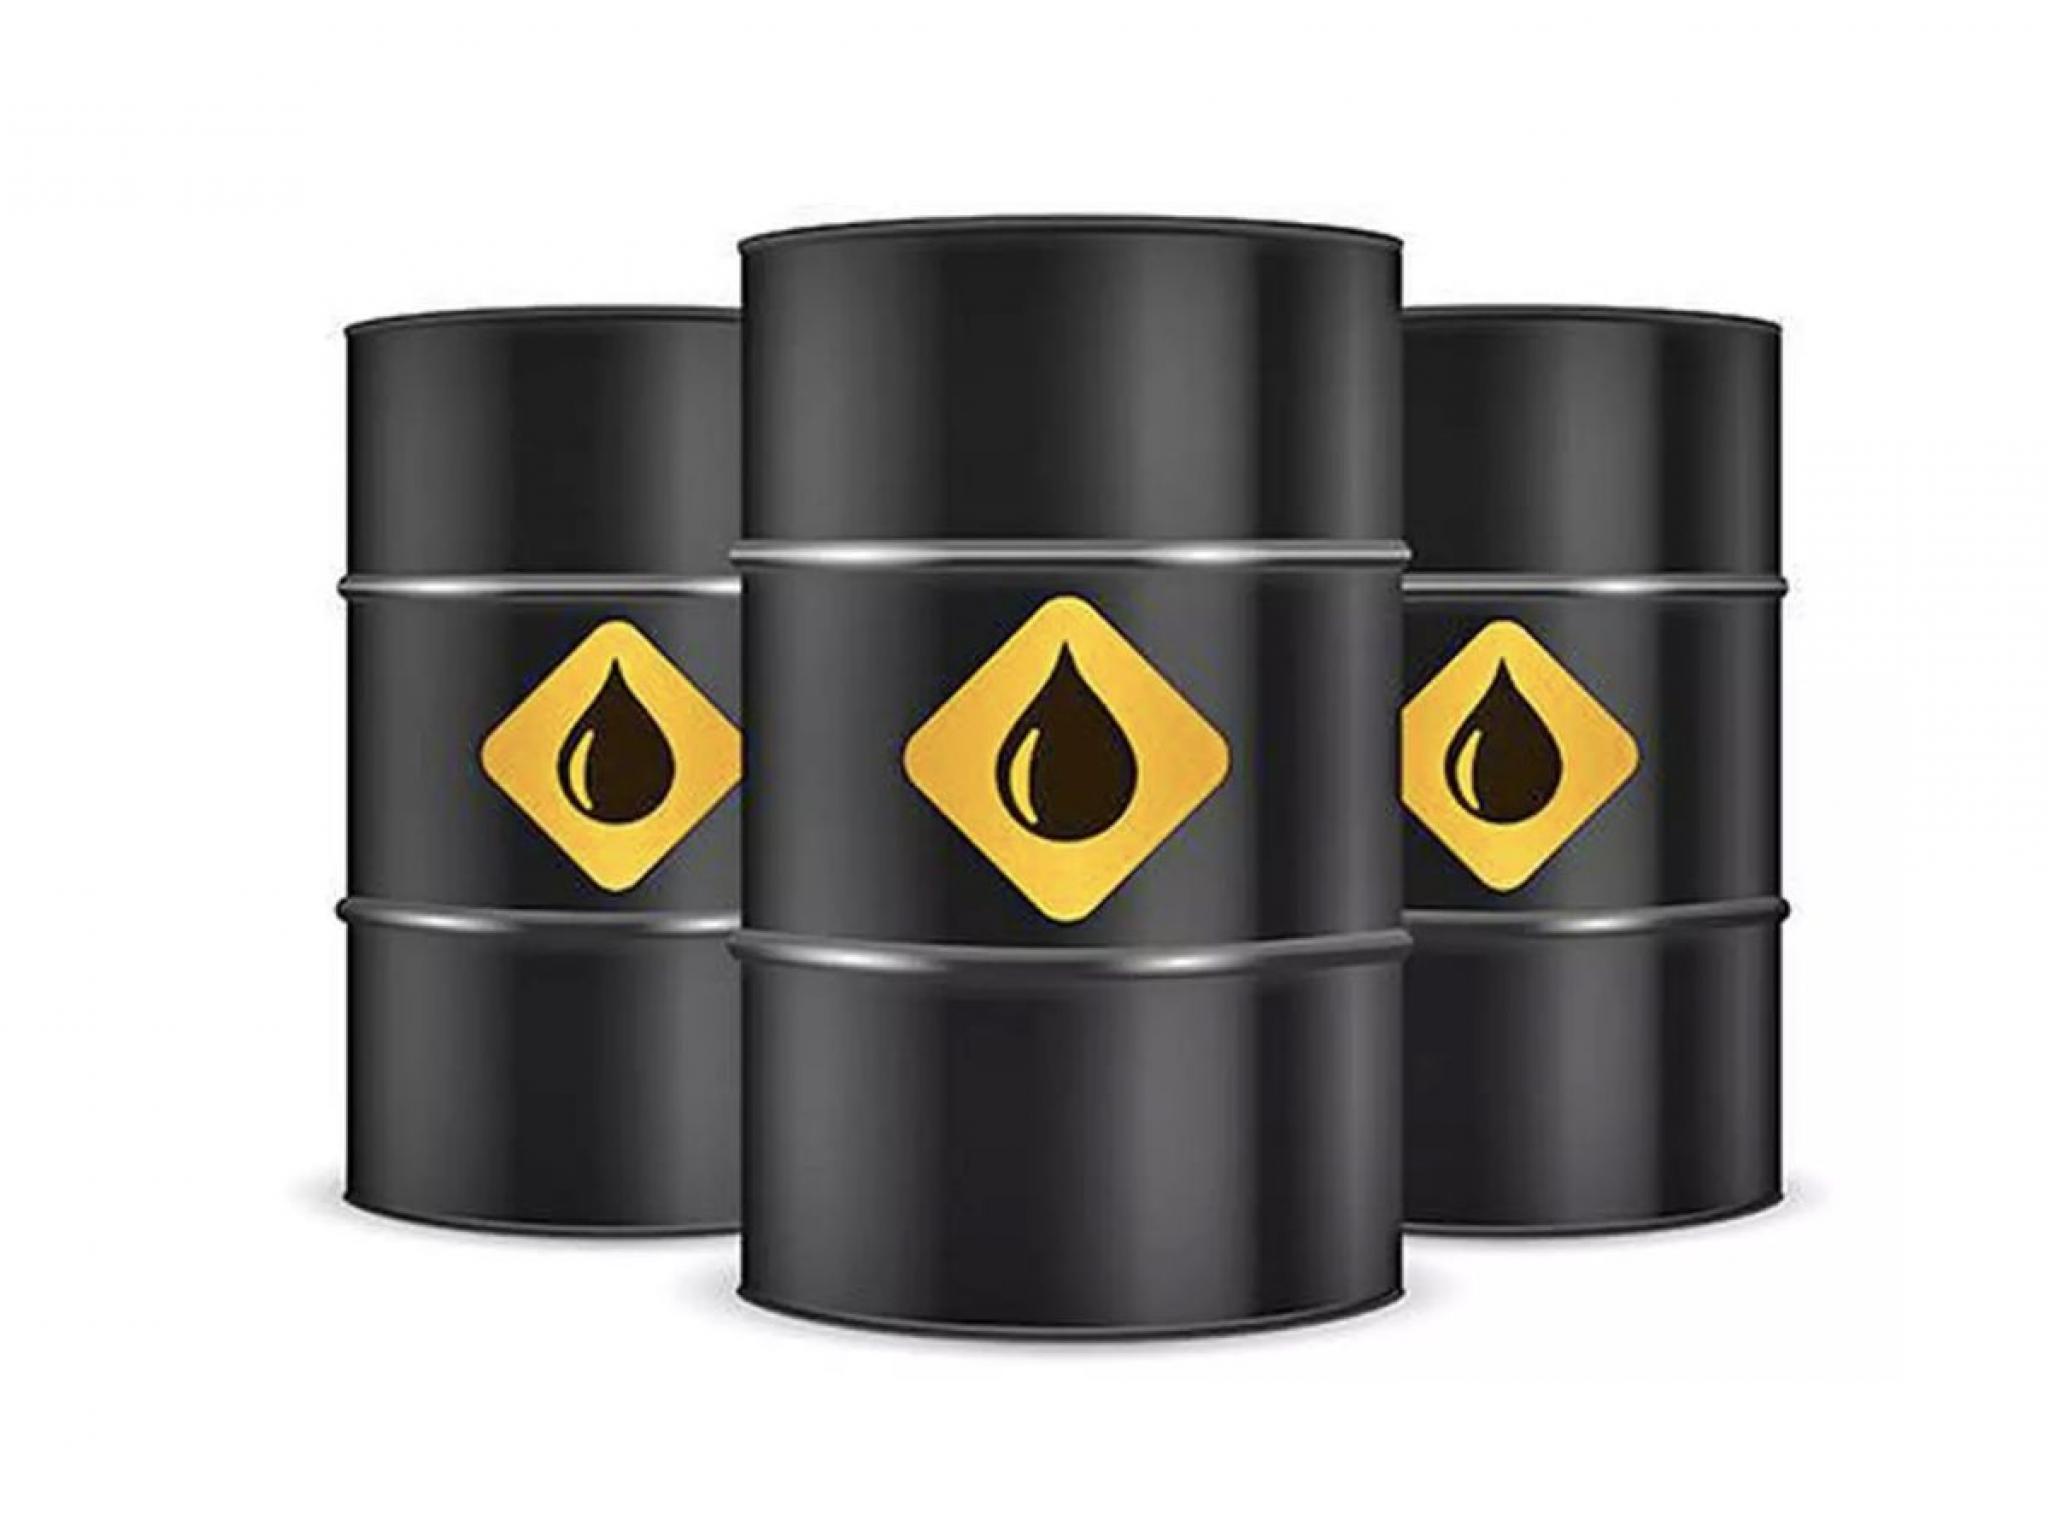  crude-oil-rises-3-us-housing-market-index-increases-in-december 